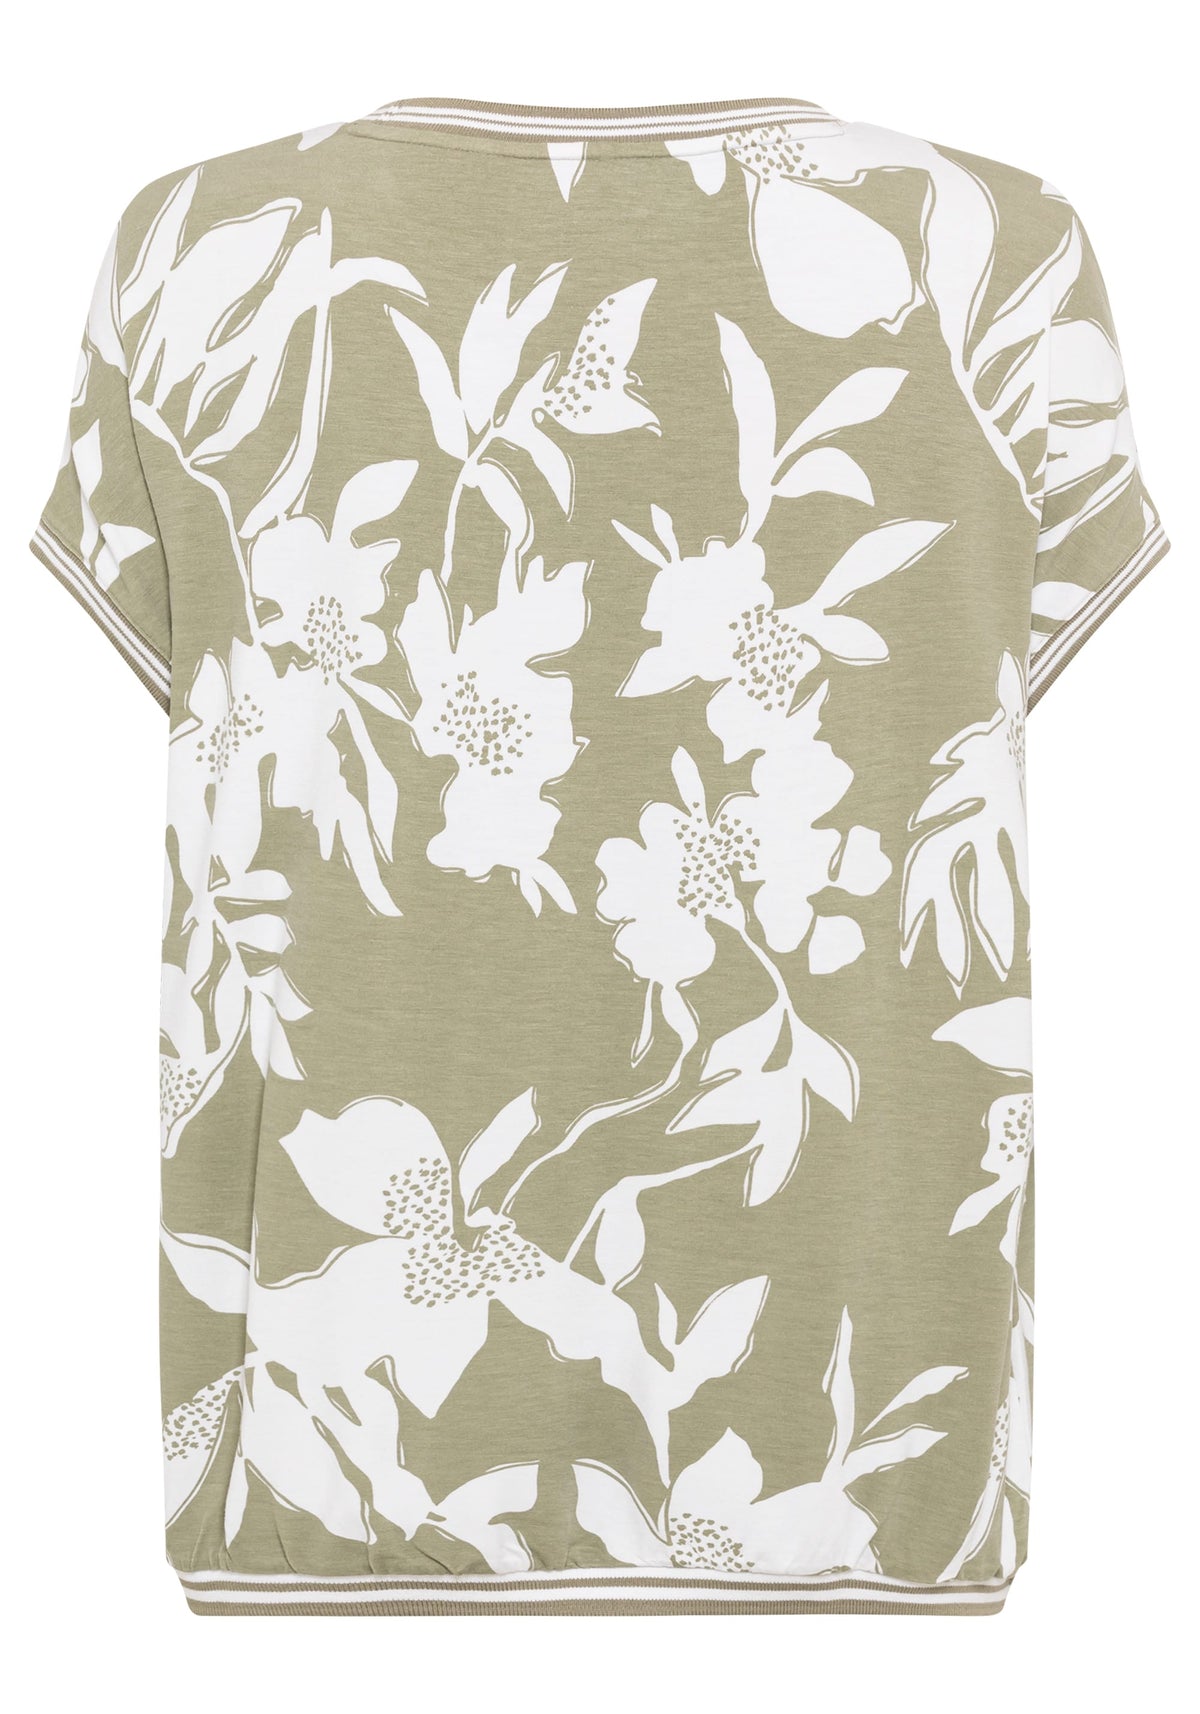 Short Sleeve Abstract Floral Print T-Shirt containing LENZING™ ECOVERO™ Viscose